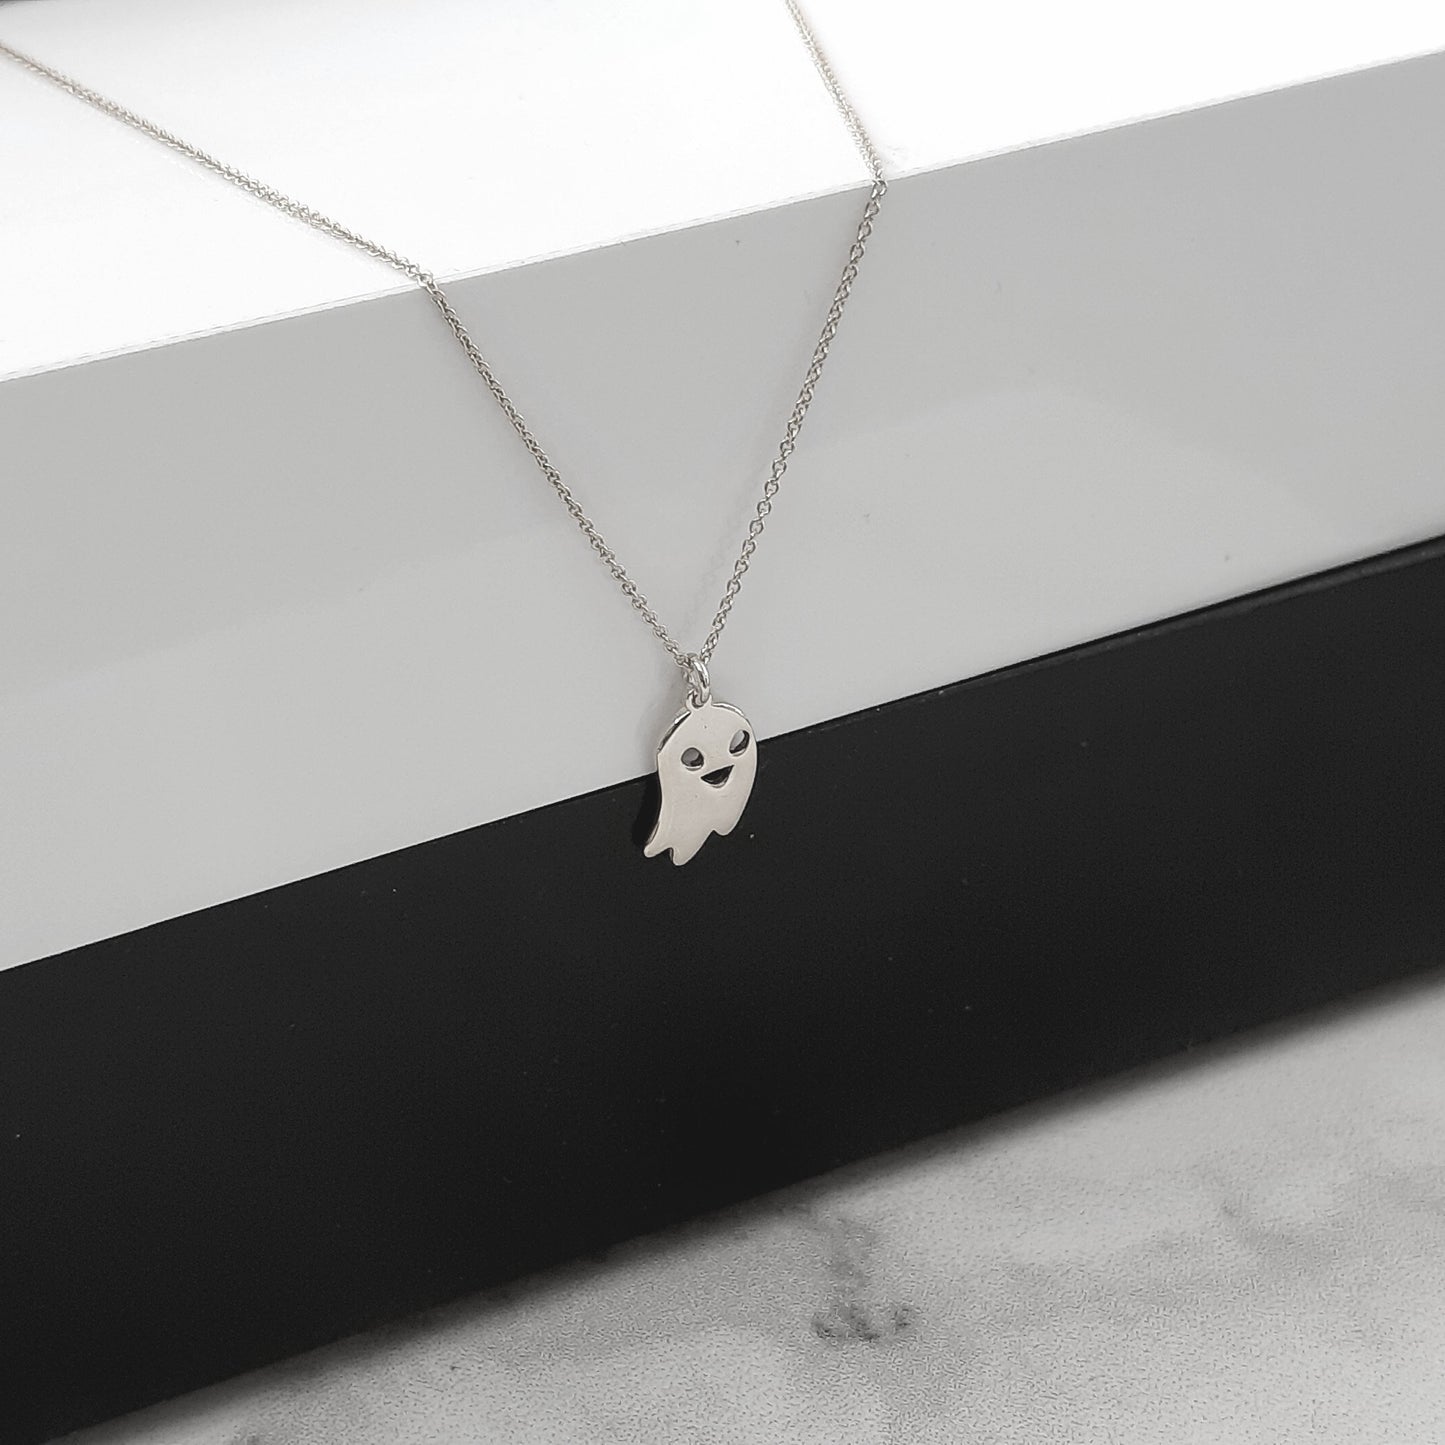 Cute Ghost Necklace, 14K Solid Gold Ghost Charm Necklace, Halloween Gift, Girlfriend Gift, Personalized, Best Friend Gift, Gift For her